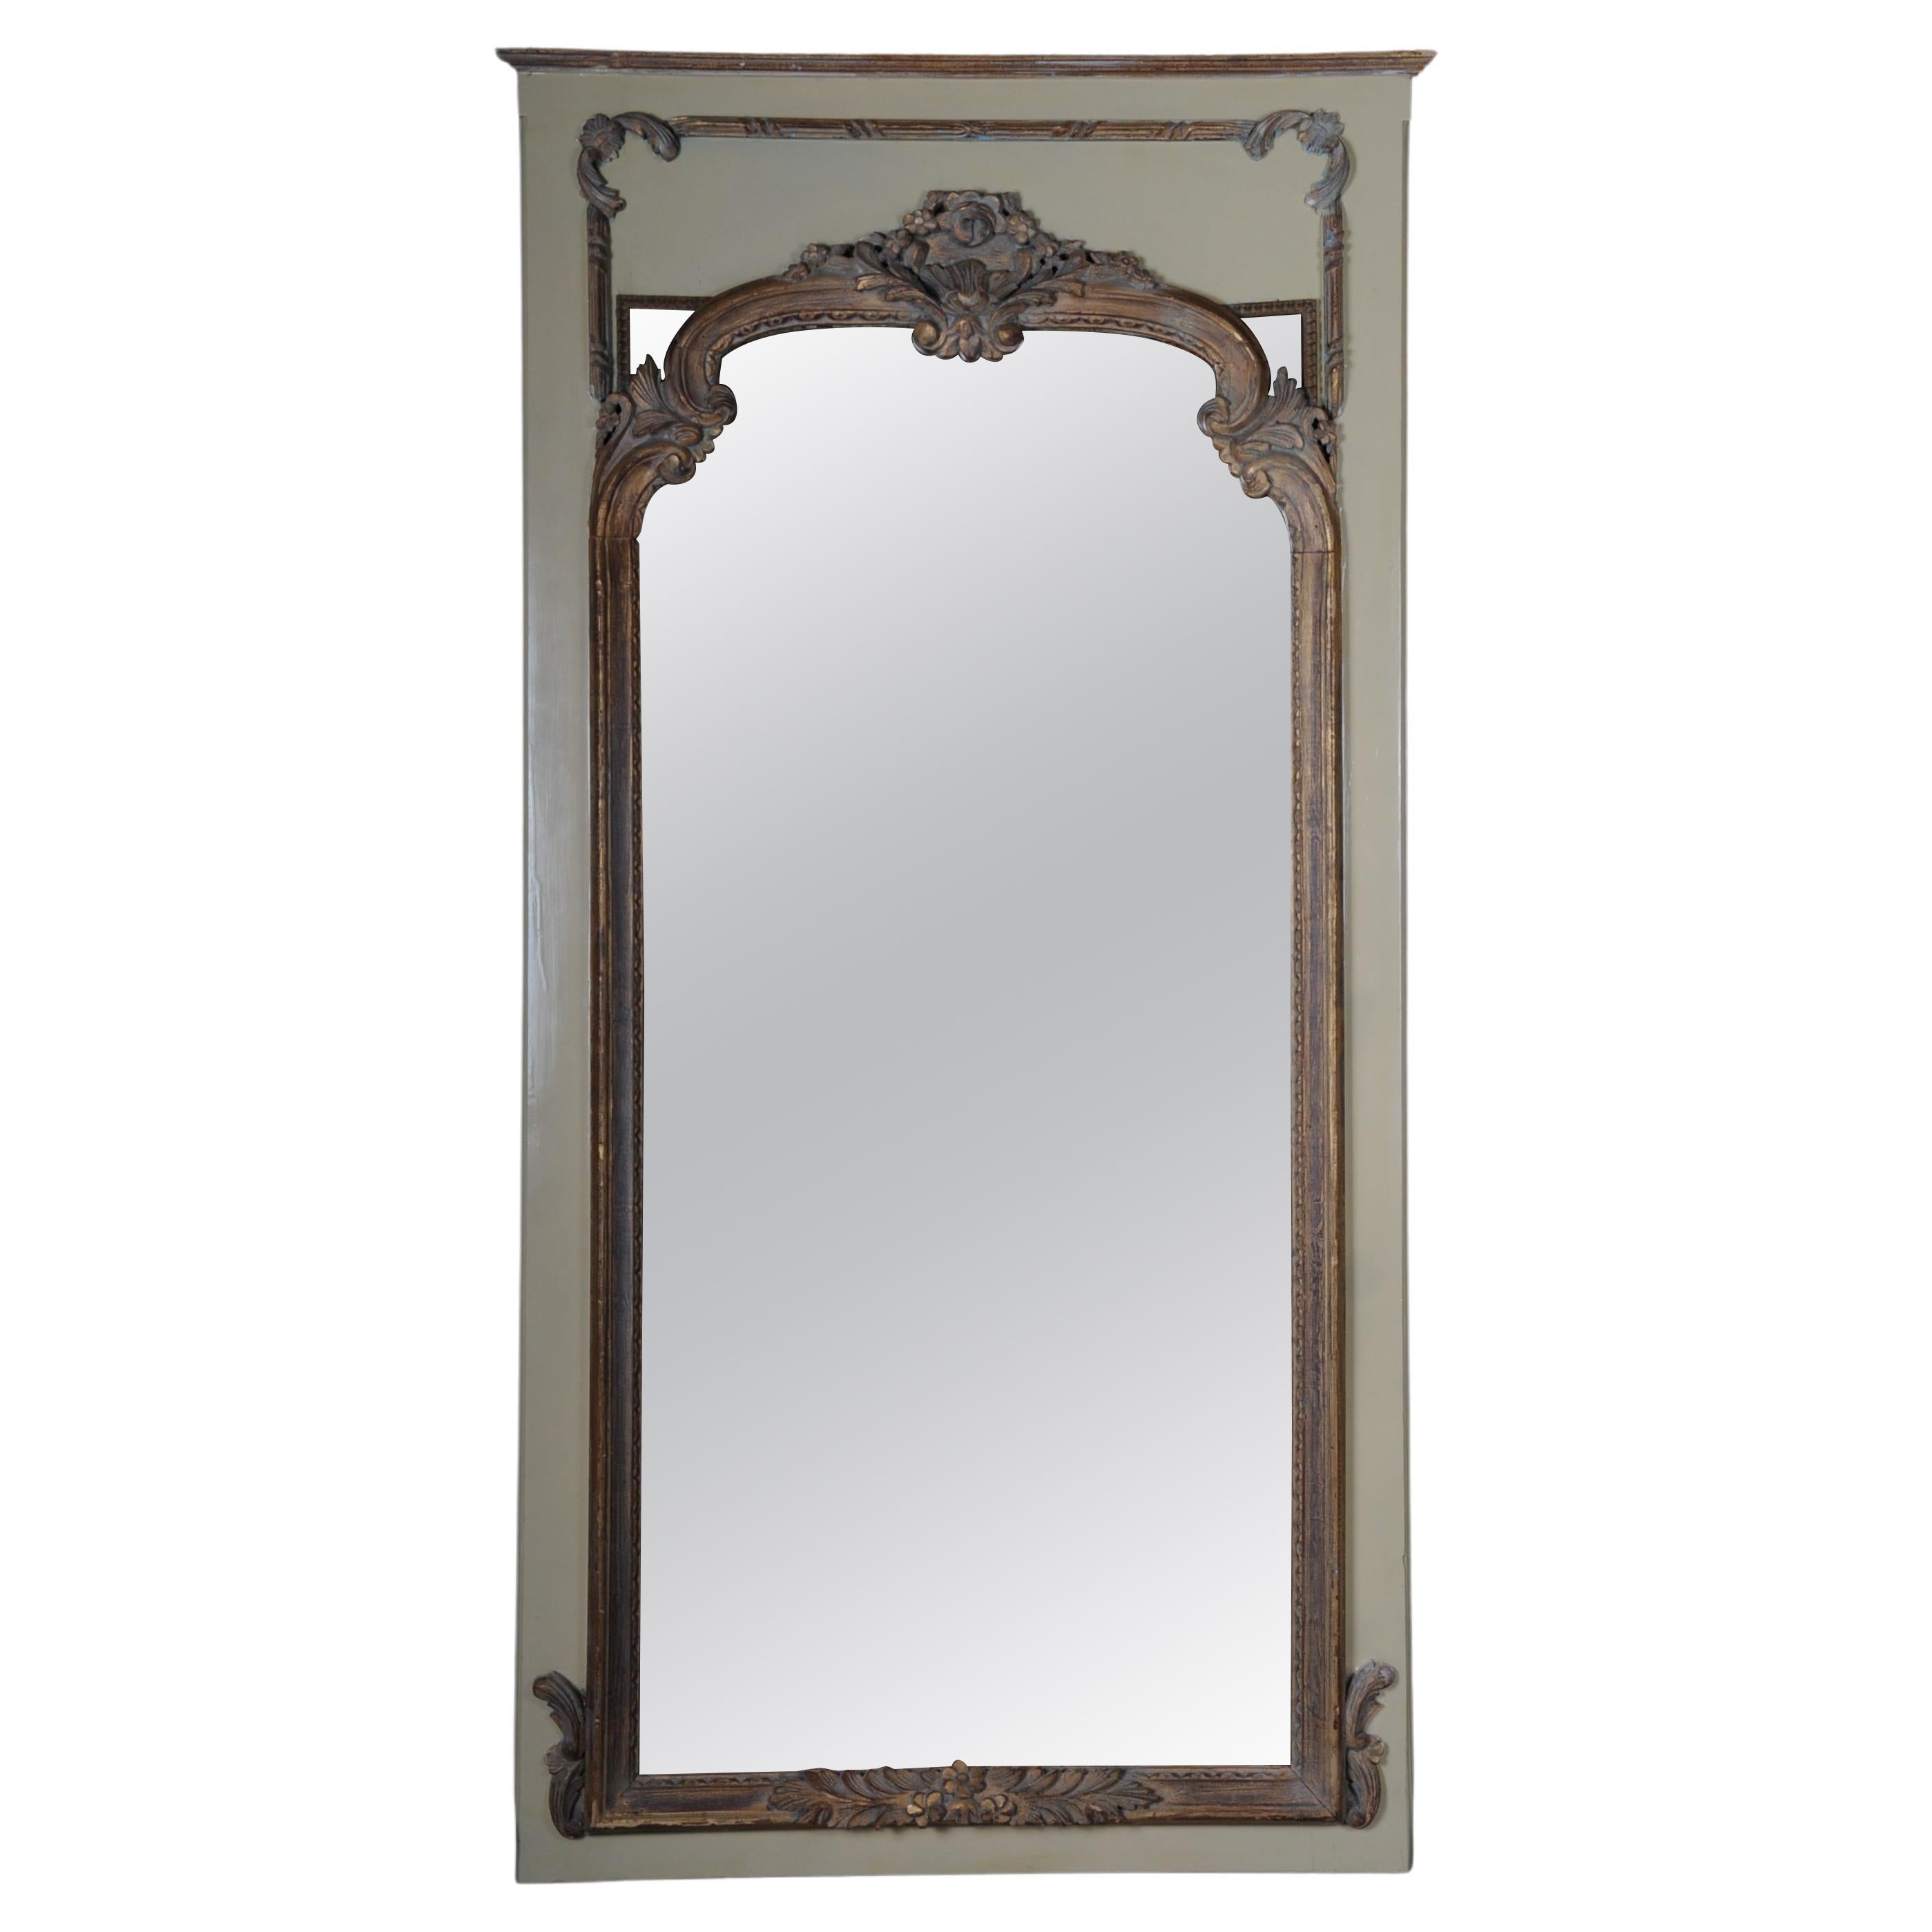 20th Century Large Classicism Full Length Mirror, Beechwood For Sale